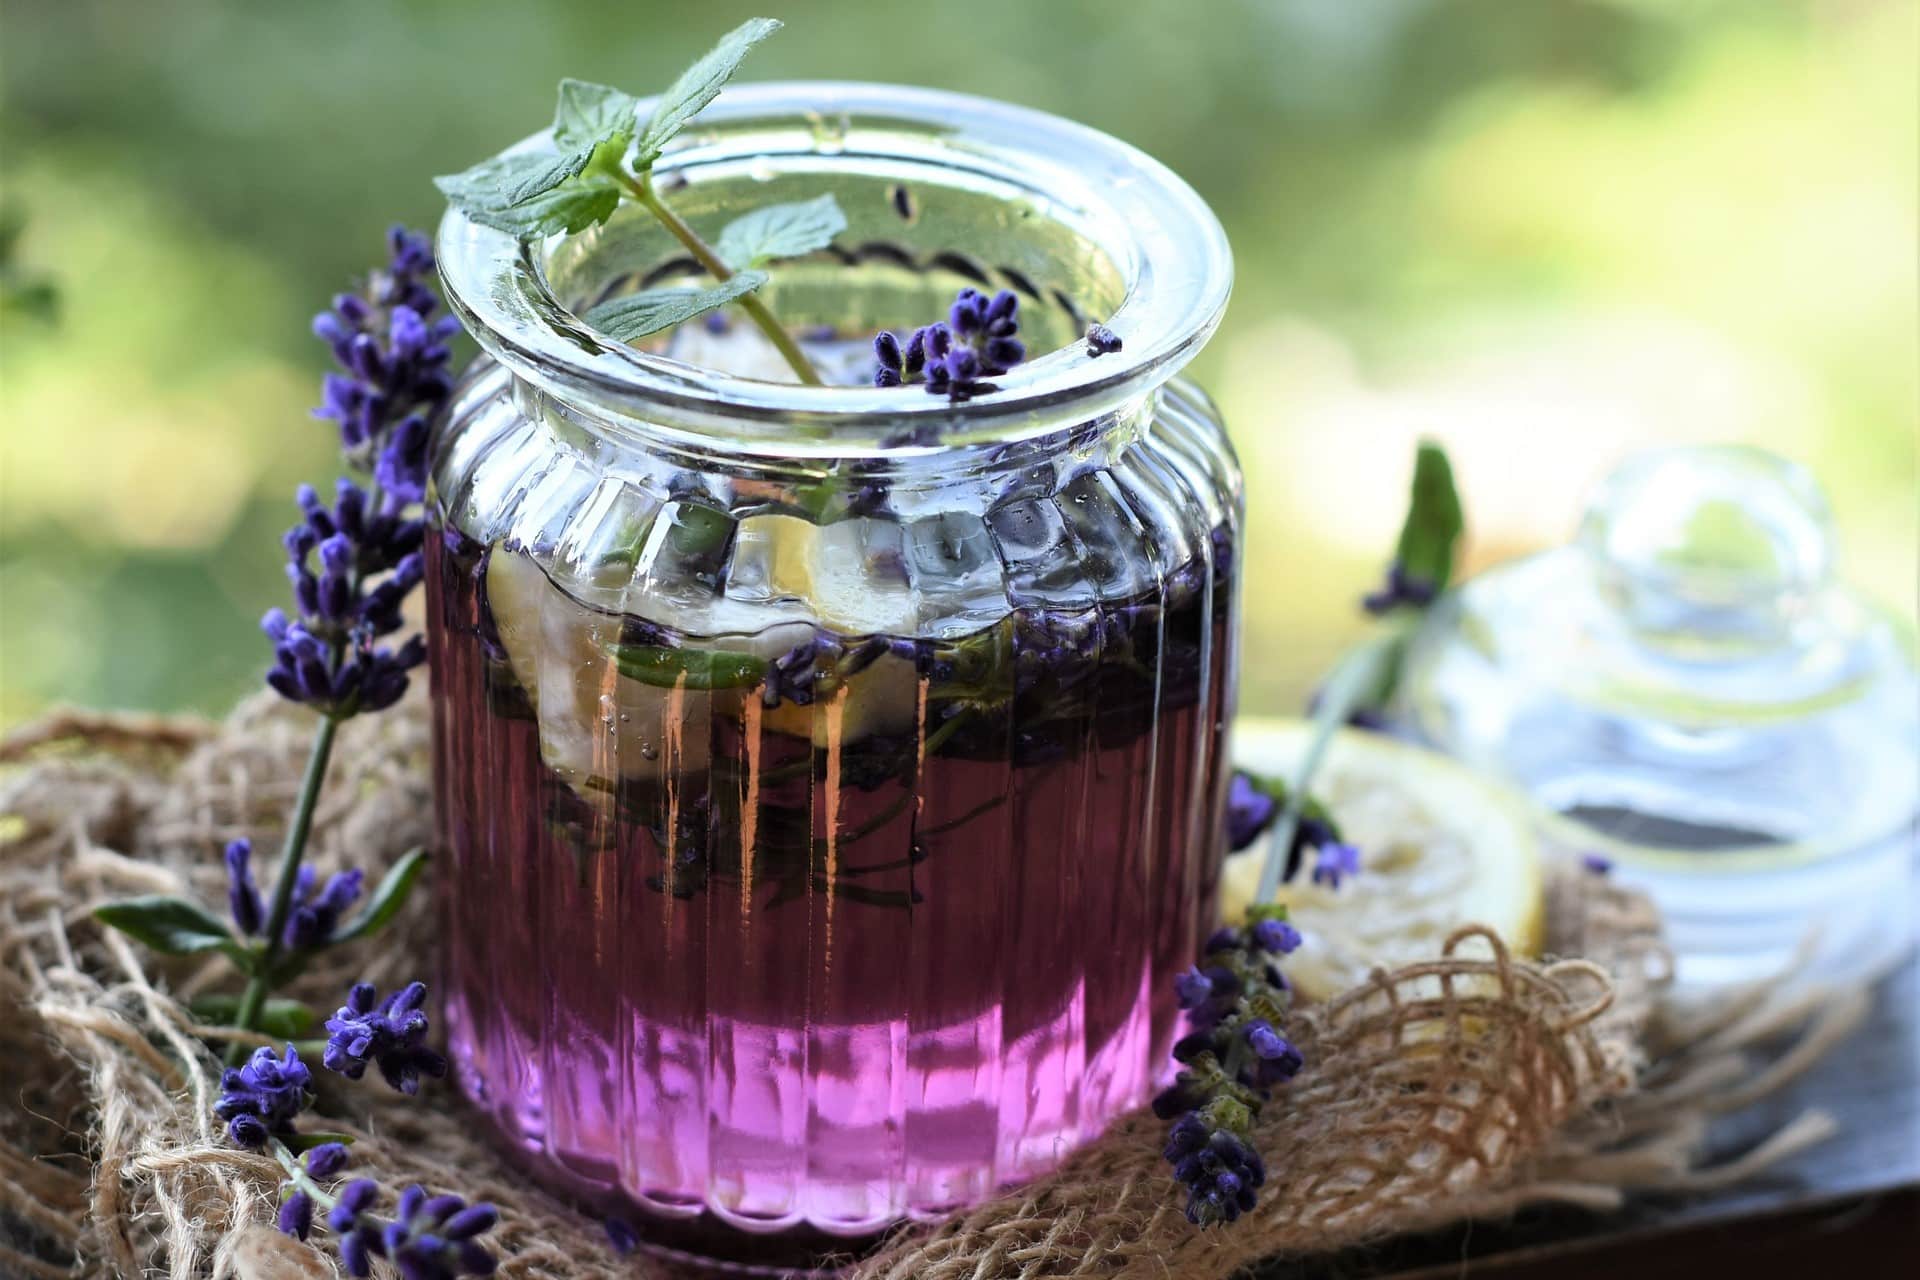 How to Make Lavender Syrup